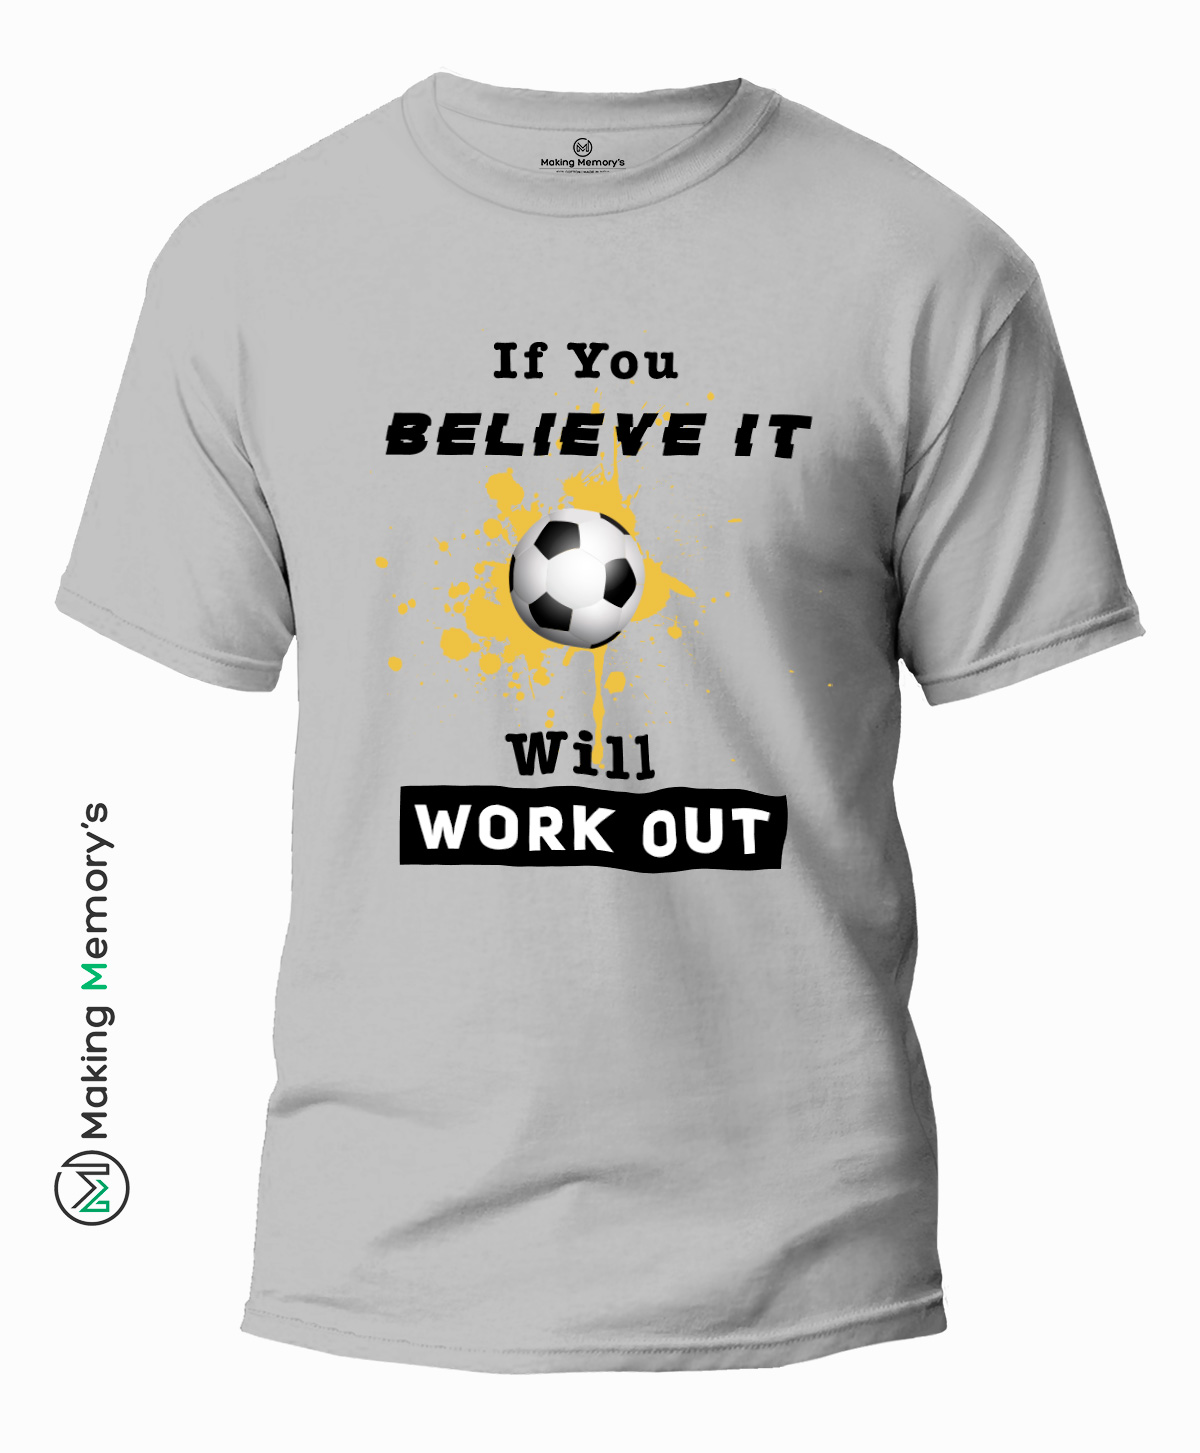 If-You-Believe-It-Will-Work-Out-Gray-T-Shirt